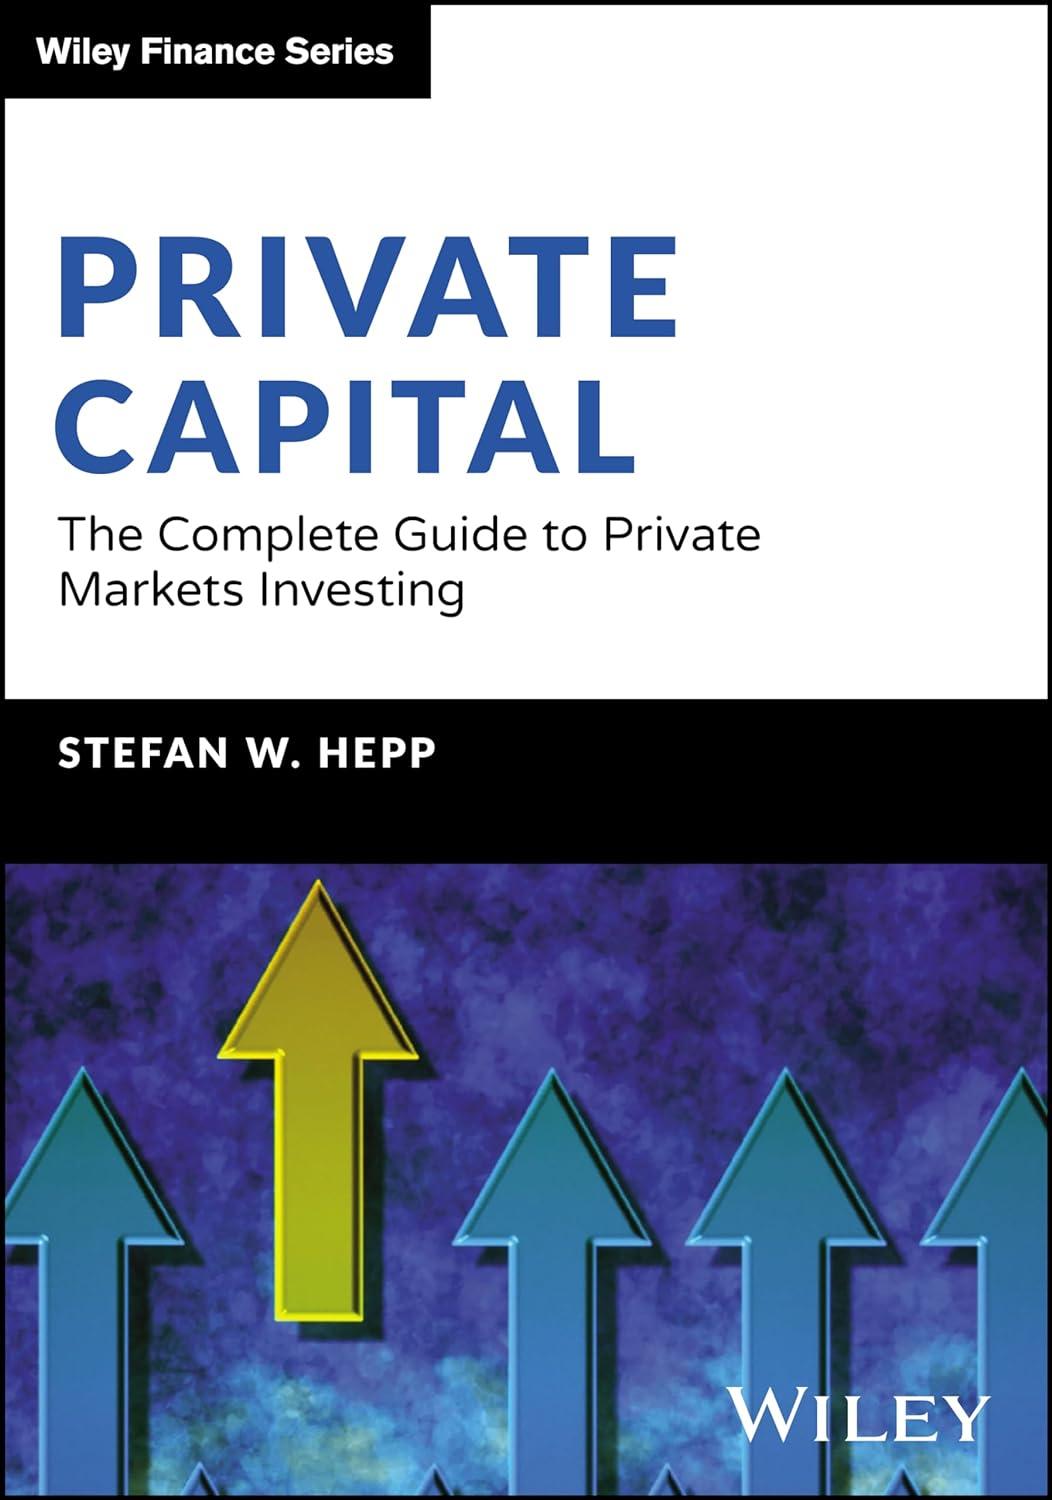 private capital the complete guide to private markets investing 1st edition stefan w. hepp 1394217692,